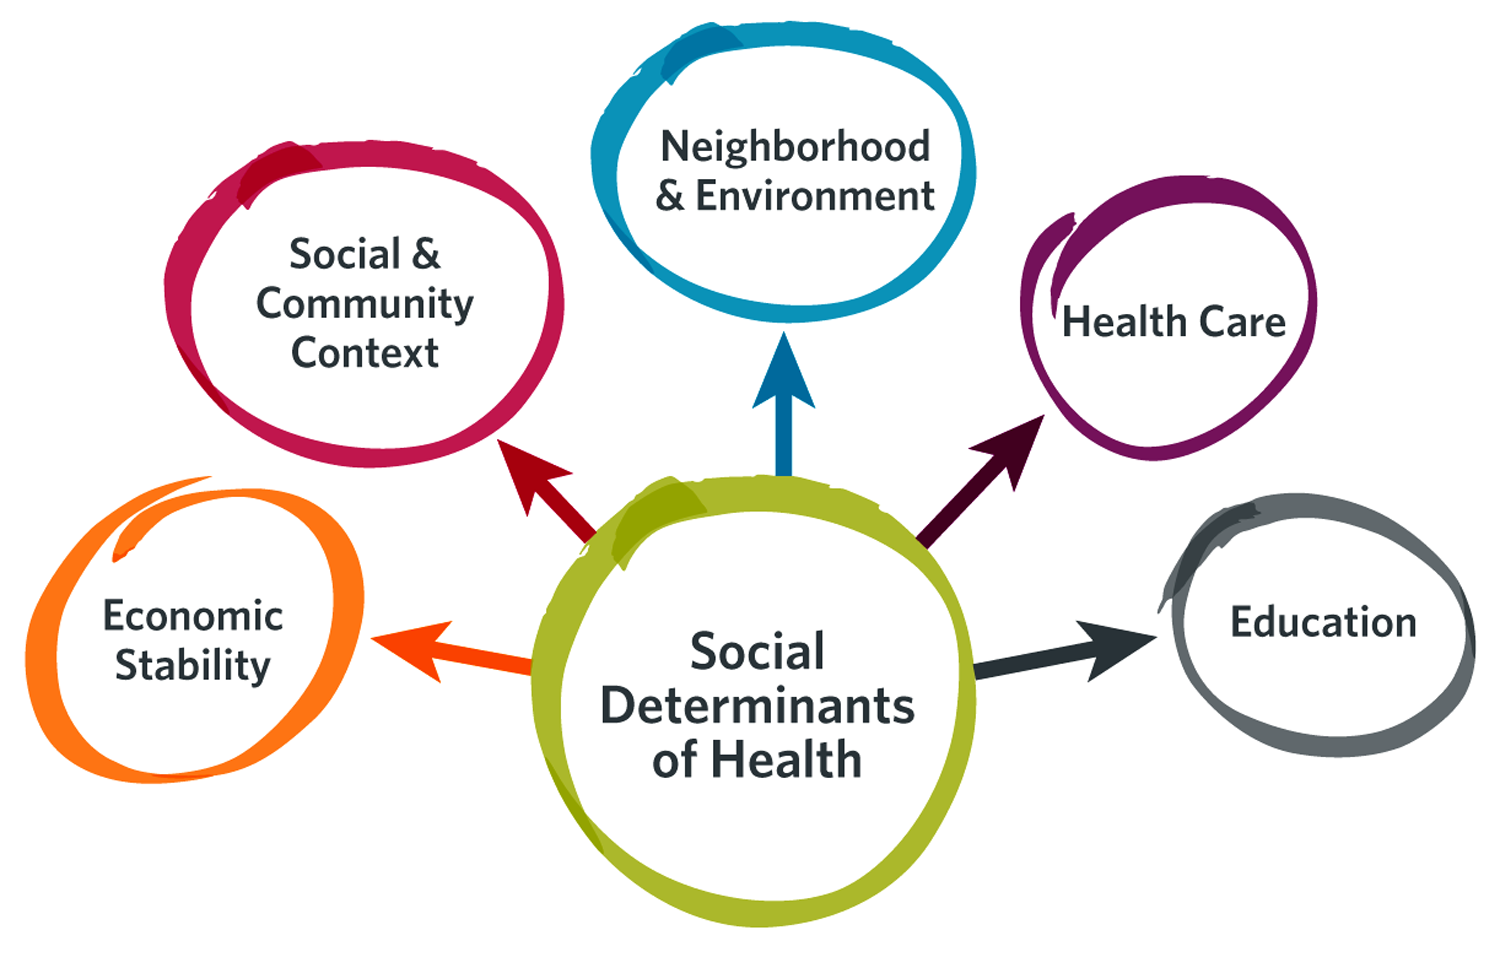 Social Determinants of Health are the conditions in which we live, work and play.